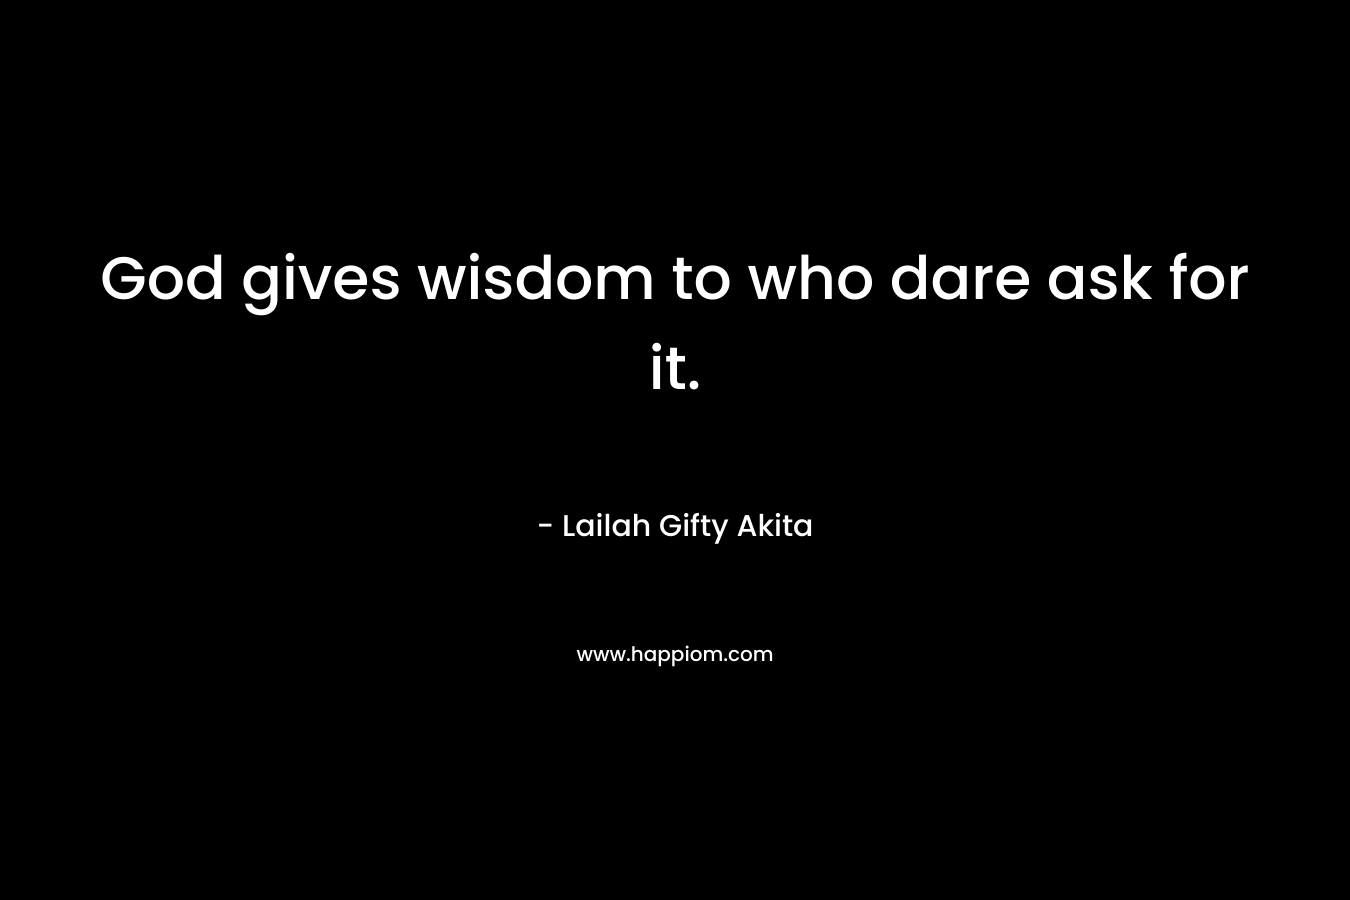 God gives wisdom to who dare ask for it.